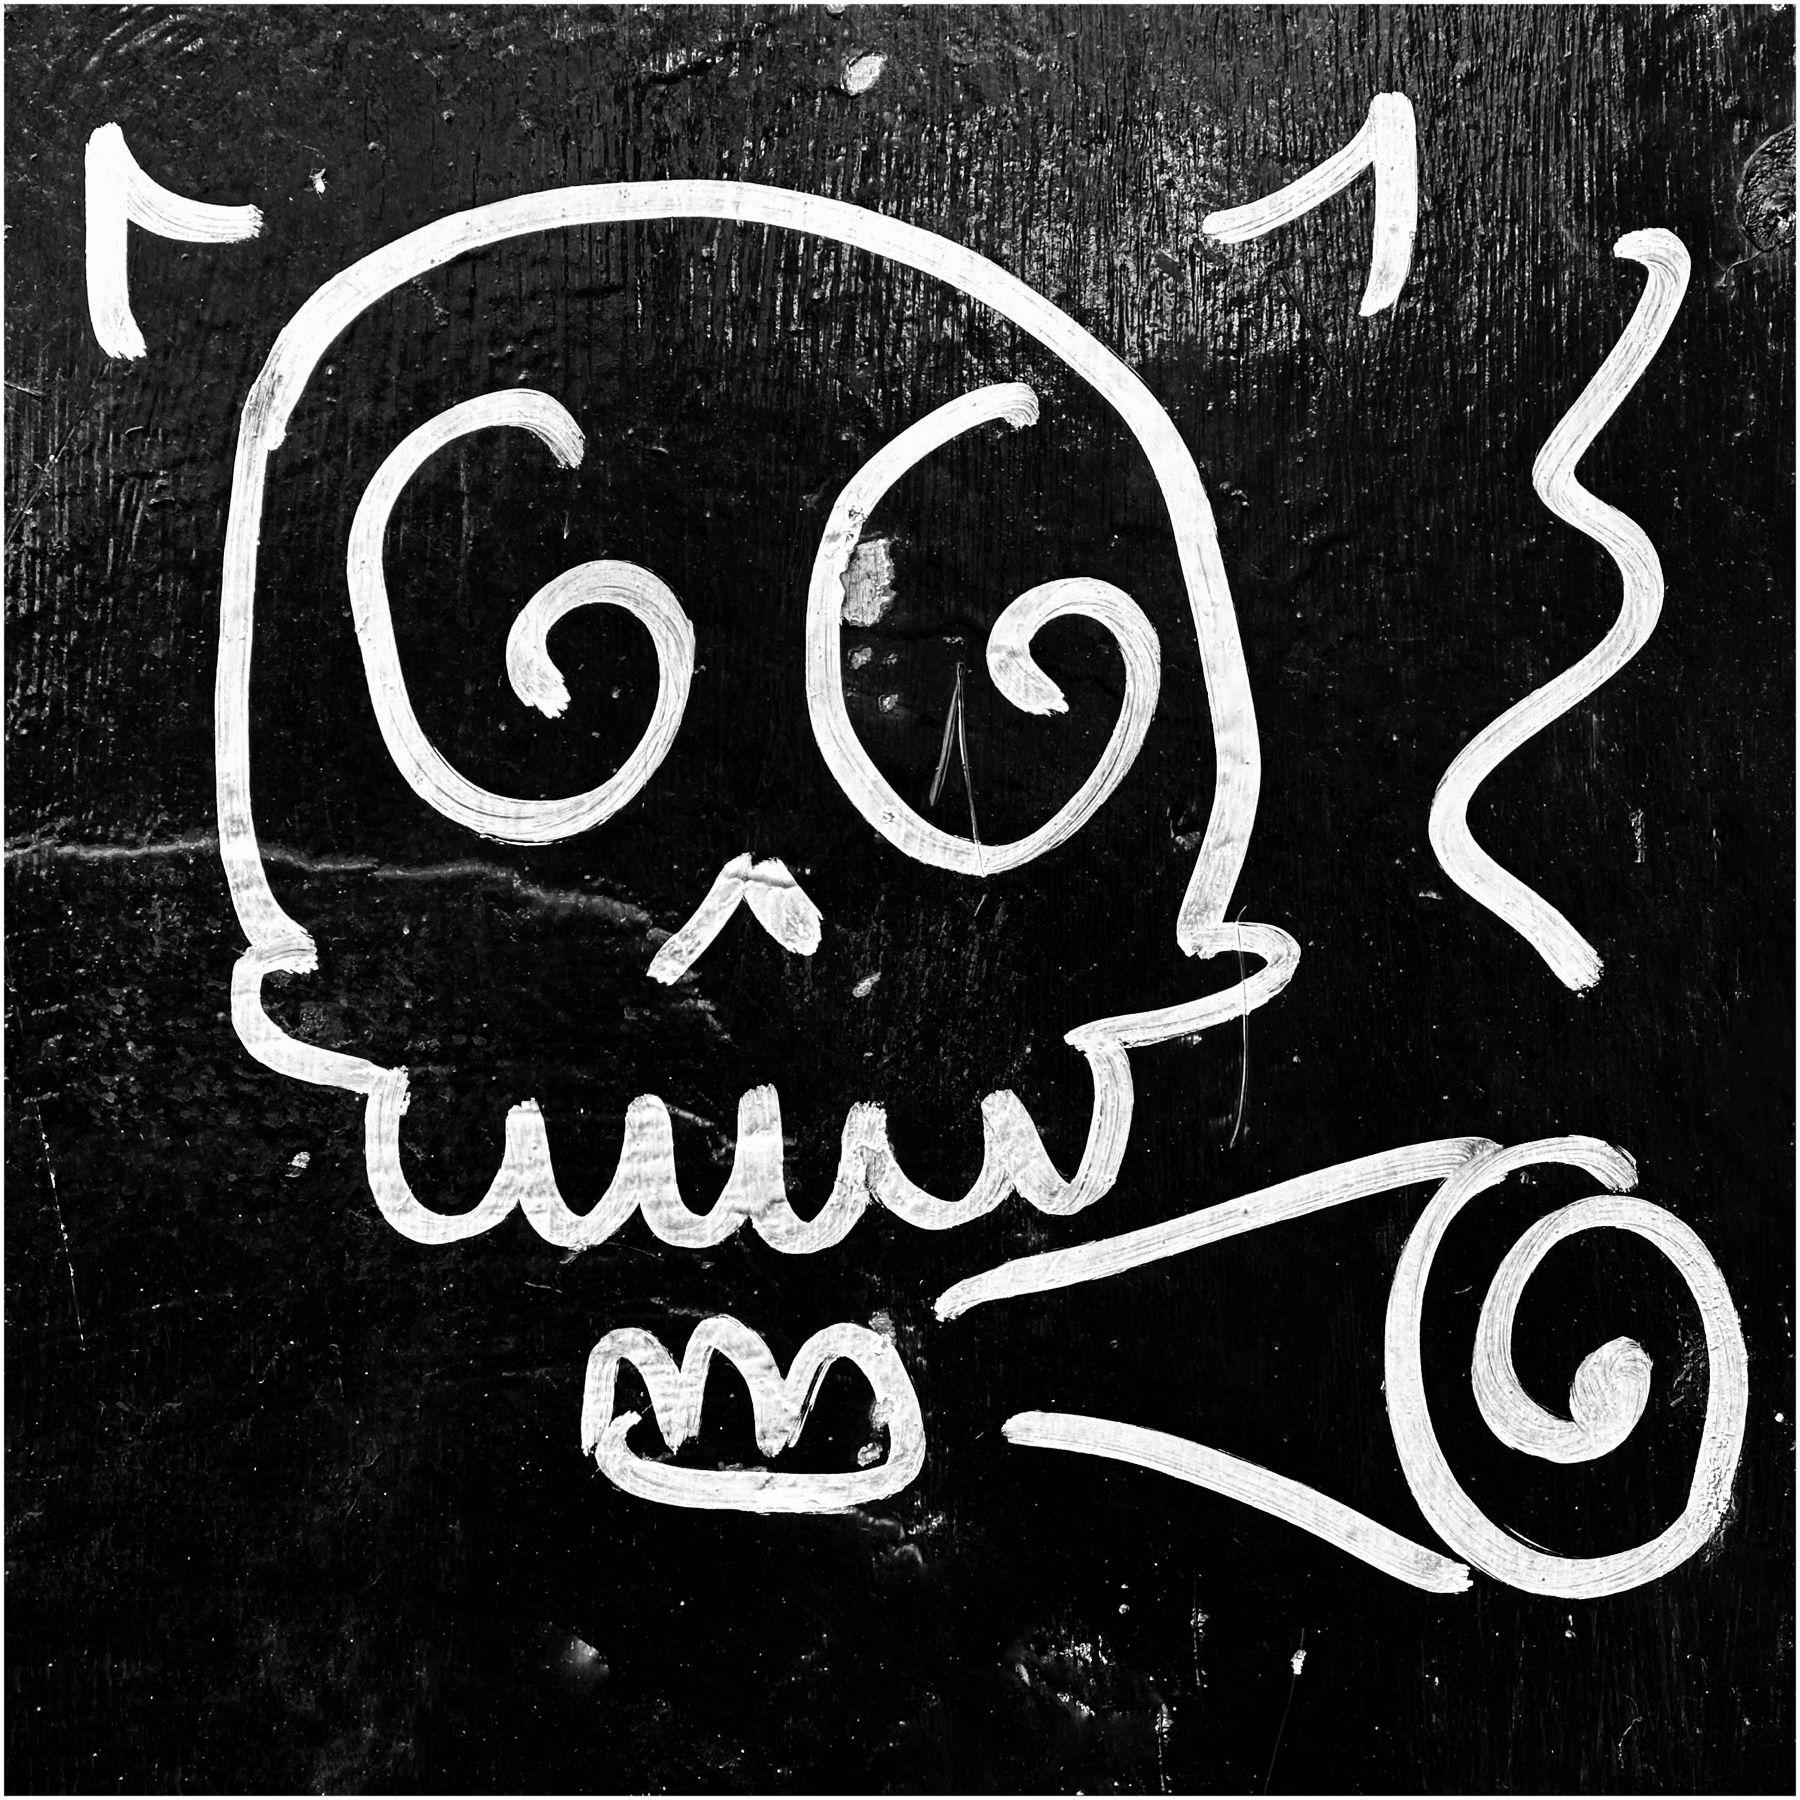 A black and white image featuring a simplistic, cartoon-style drawing of a skull with swirls and decorative elements.